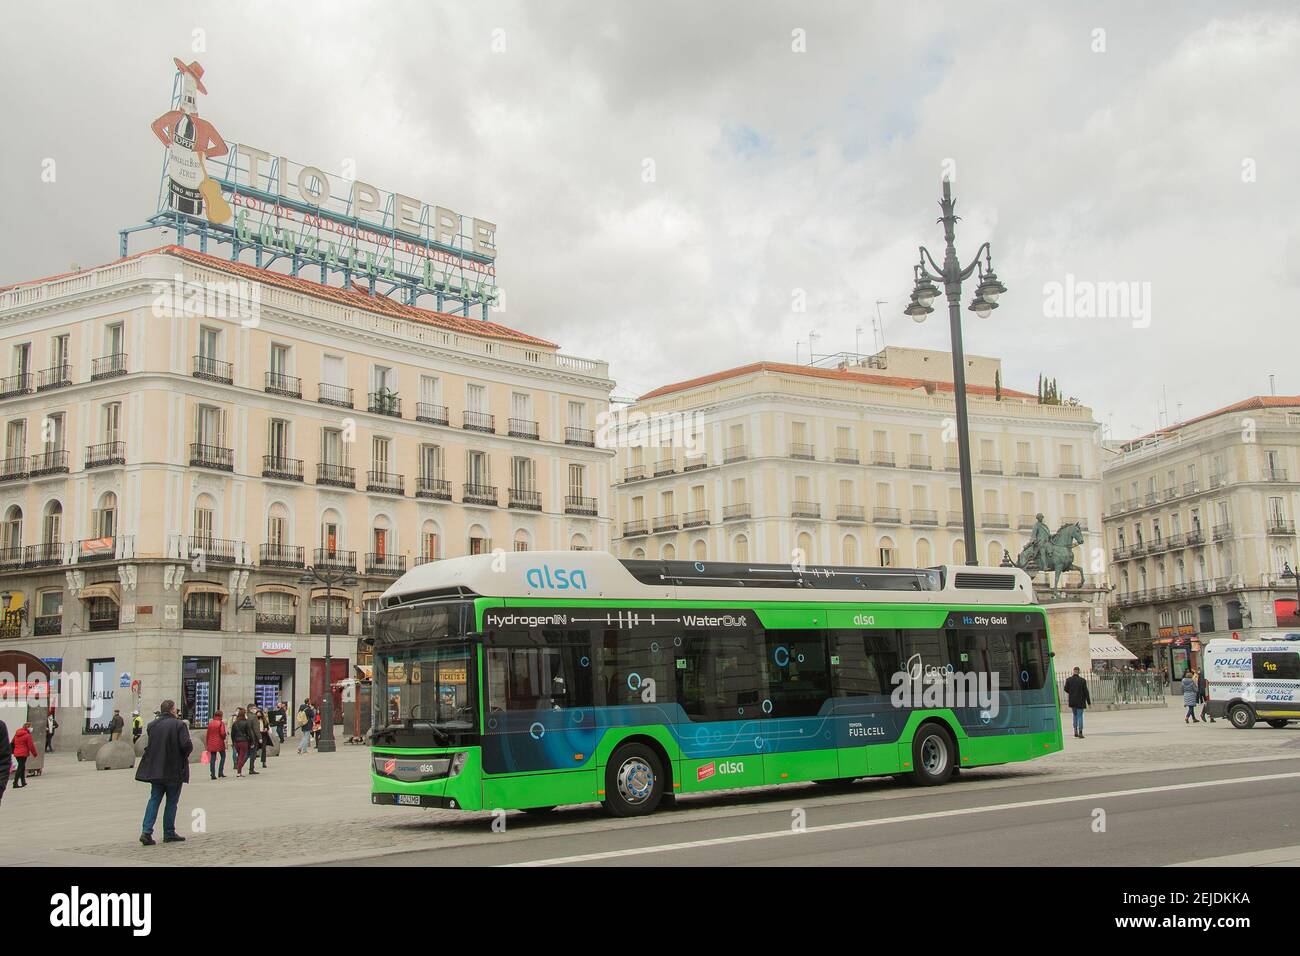 The Community of Madrid has presented this Monday the first hydrogen bus that will circulate in Spain, a vehicle that uses an electric propulsion system with a fuel cell powered by hydrogen. It is 'an innovative technology with zero CO2 emissions and guarantees autonomy that allows the bus to operate on a standard urban line without stoppages. At the event, in Puerta del Sol, the regional president, Isabel Díaz Ayuso, the Minister of Transport, Mobility and Infrastructure, Ángel Garrido, and the President of Alsa, Jorge Cosmen. 'Today the Community of Madrid begins to test the transport of the Stock Photo